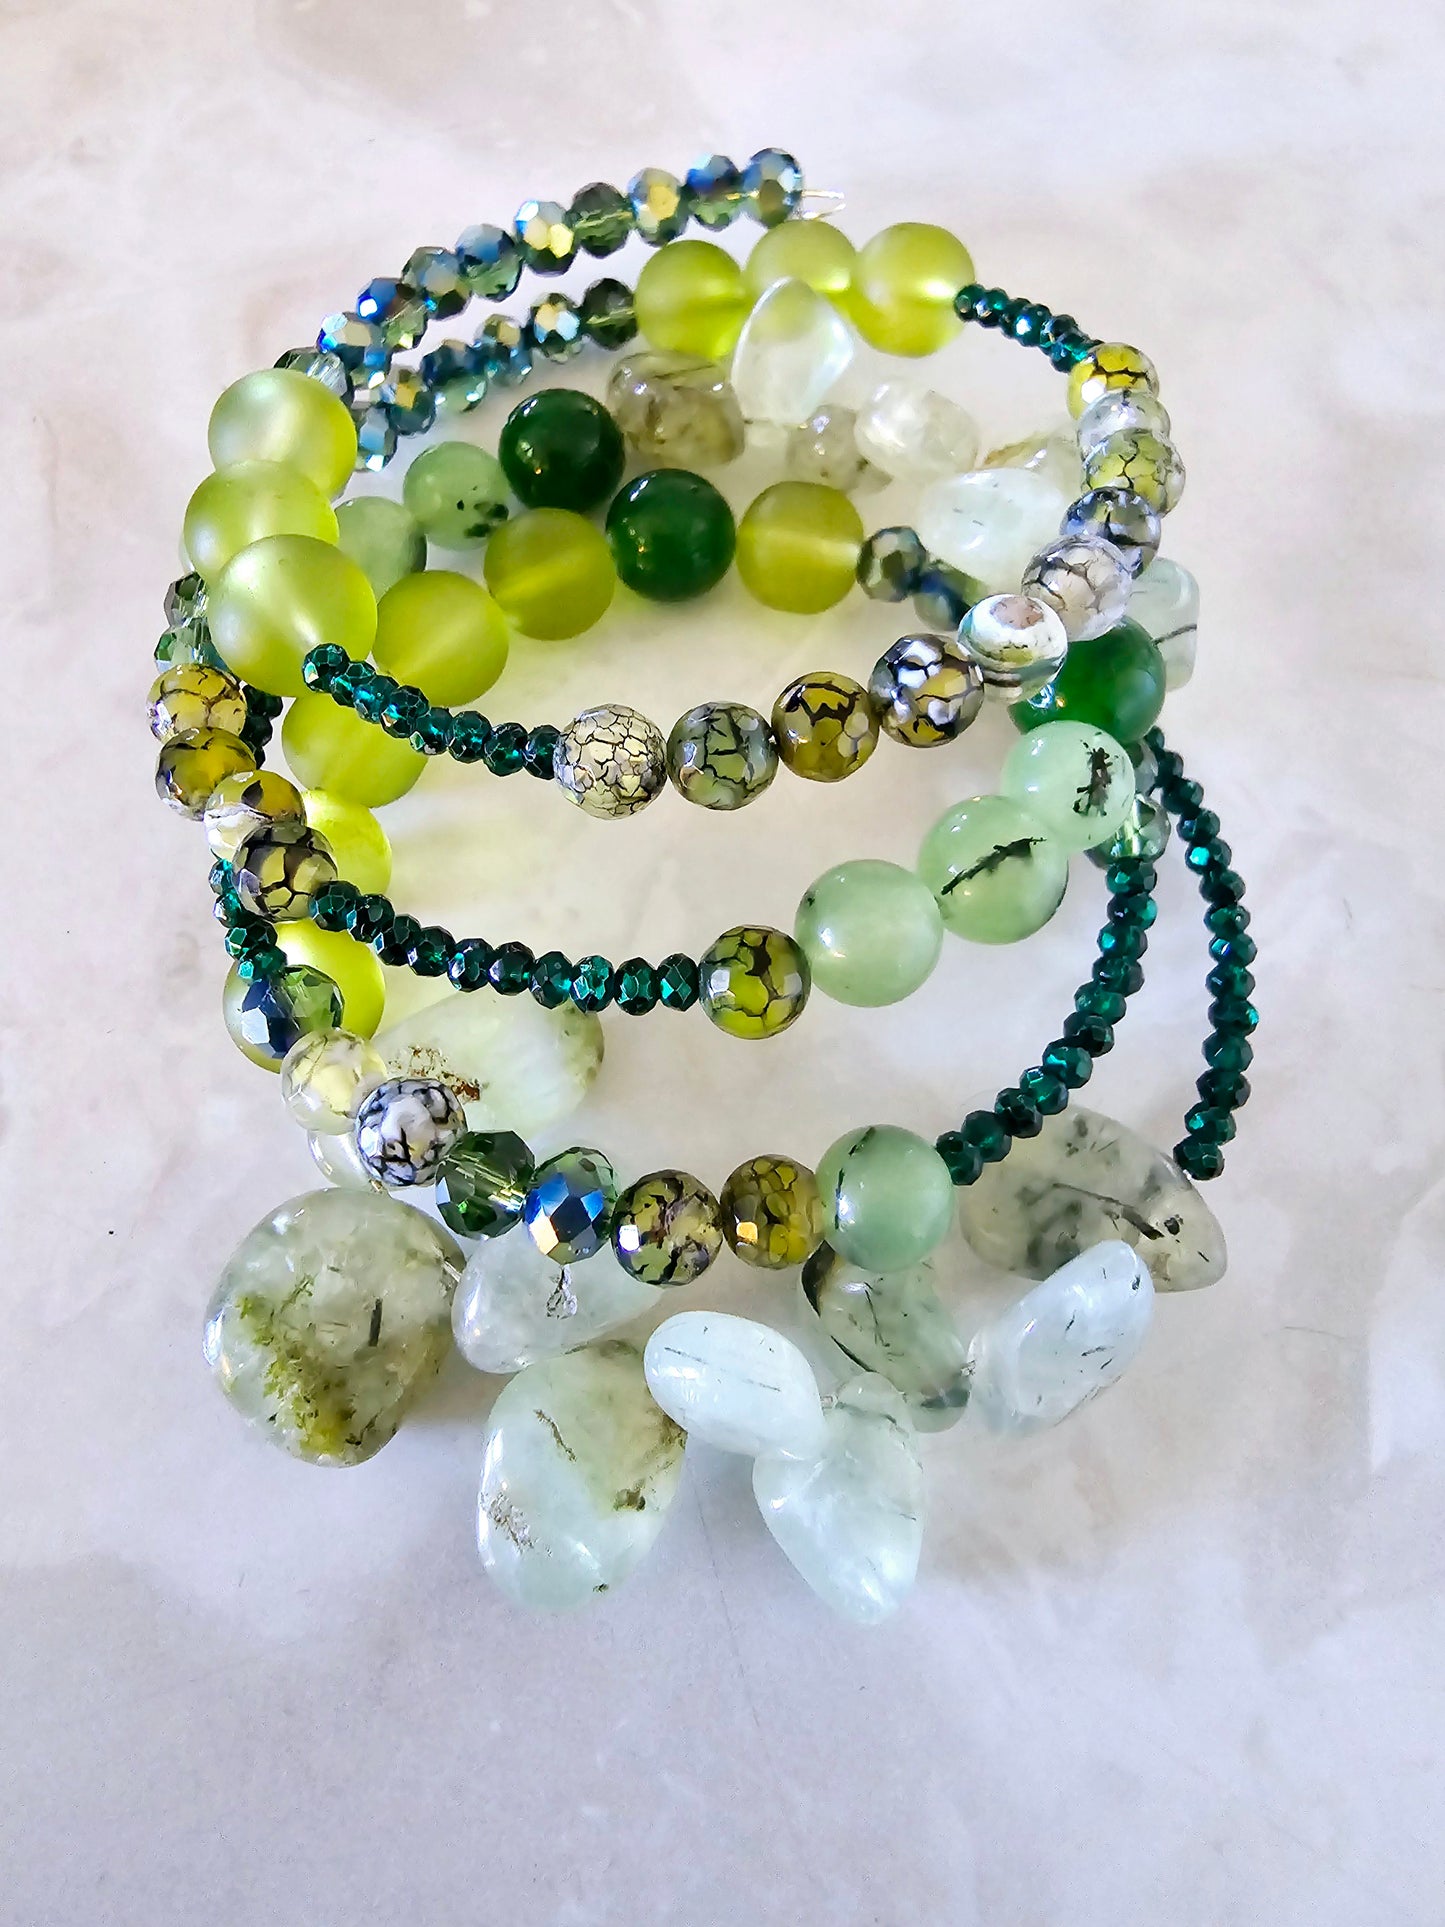 Beaded Jewelry Set Bracelet + Earrings + Necklace Moss Agate Beads Fashion Statement Gift or Her